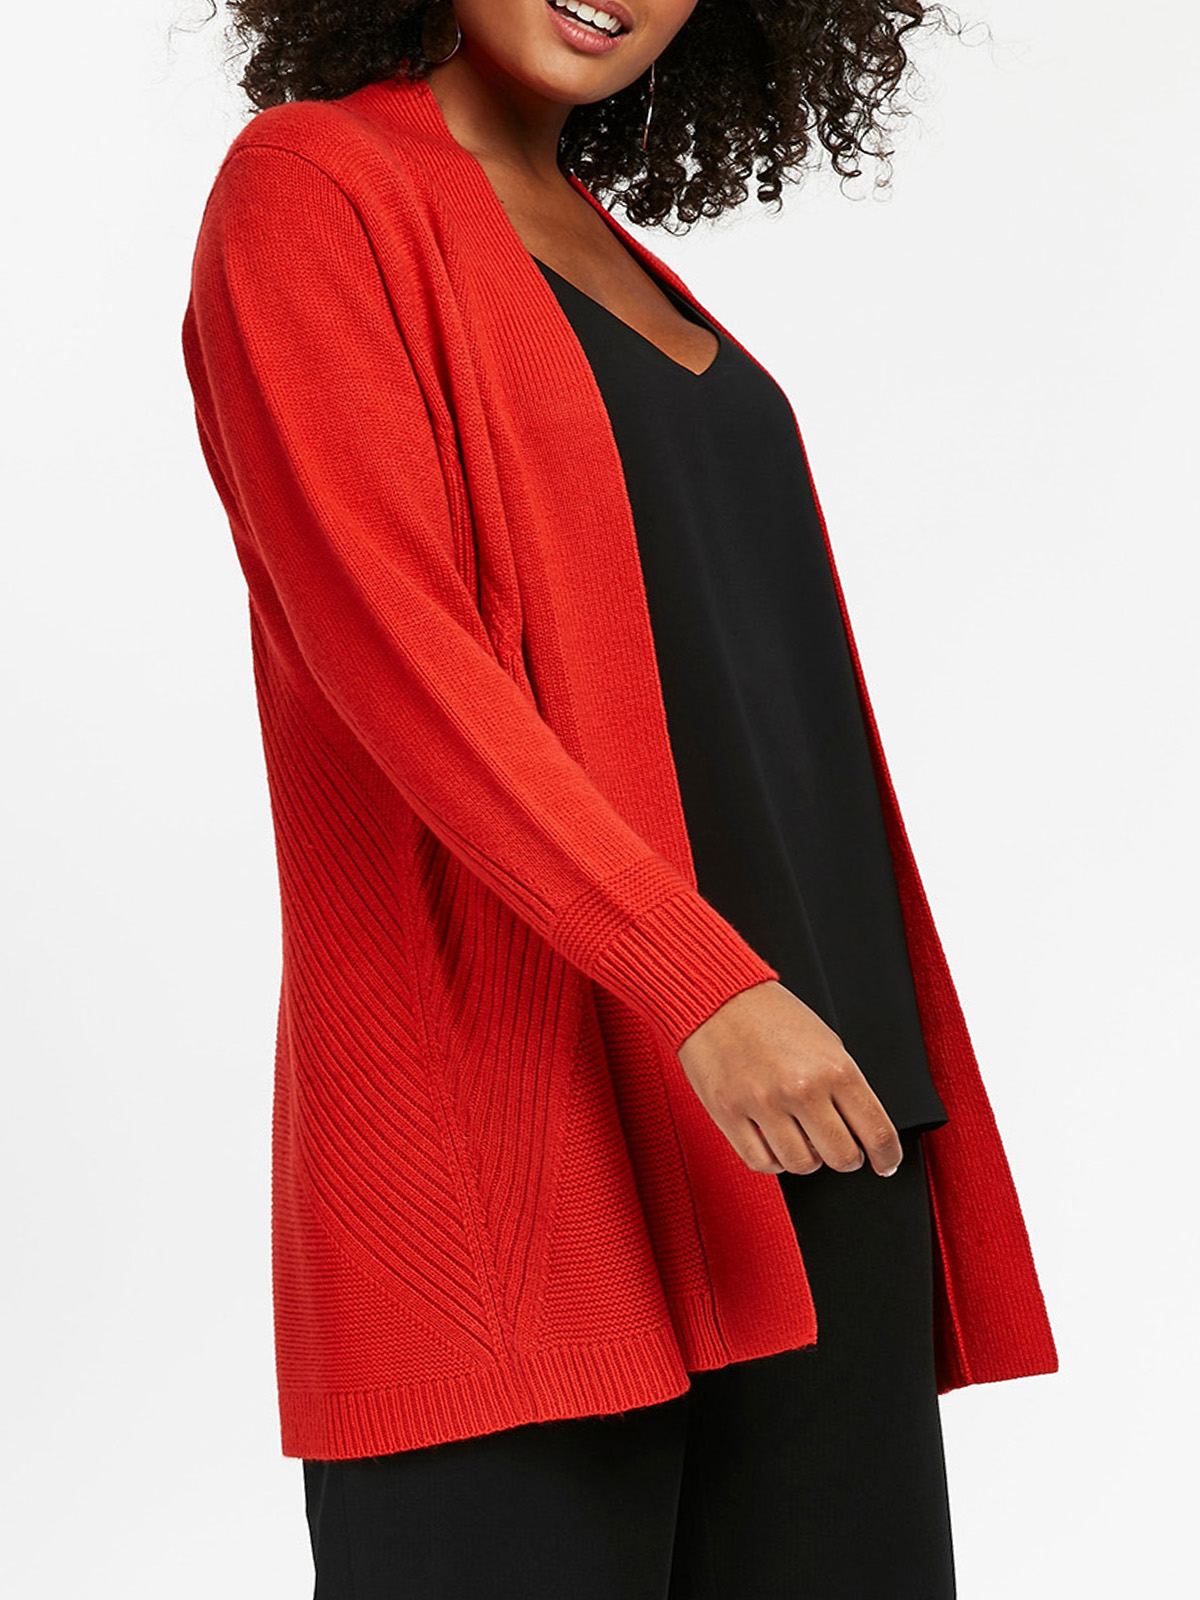 3VANS RED Open Front Ribbed Cardigan - Plus Size 14 to 30/32